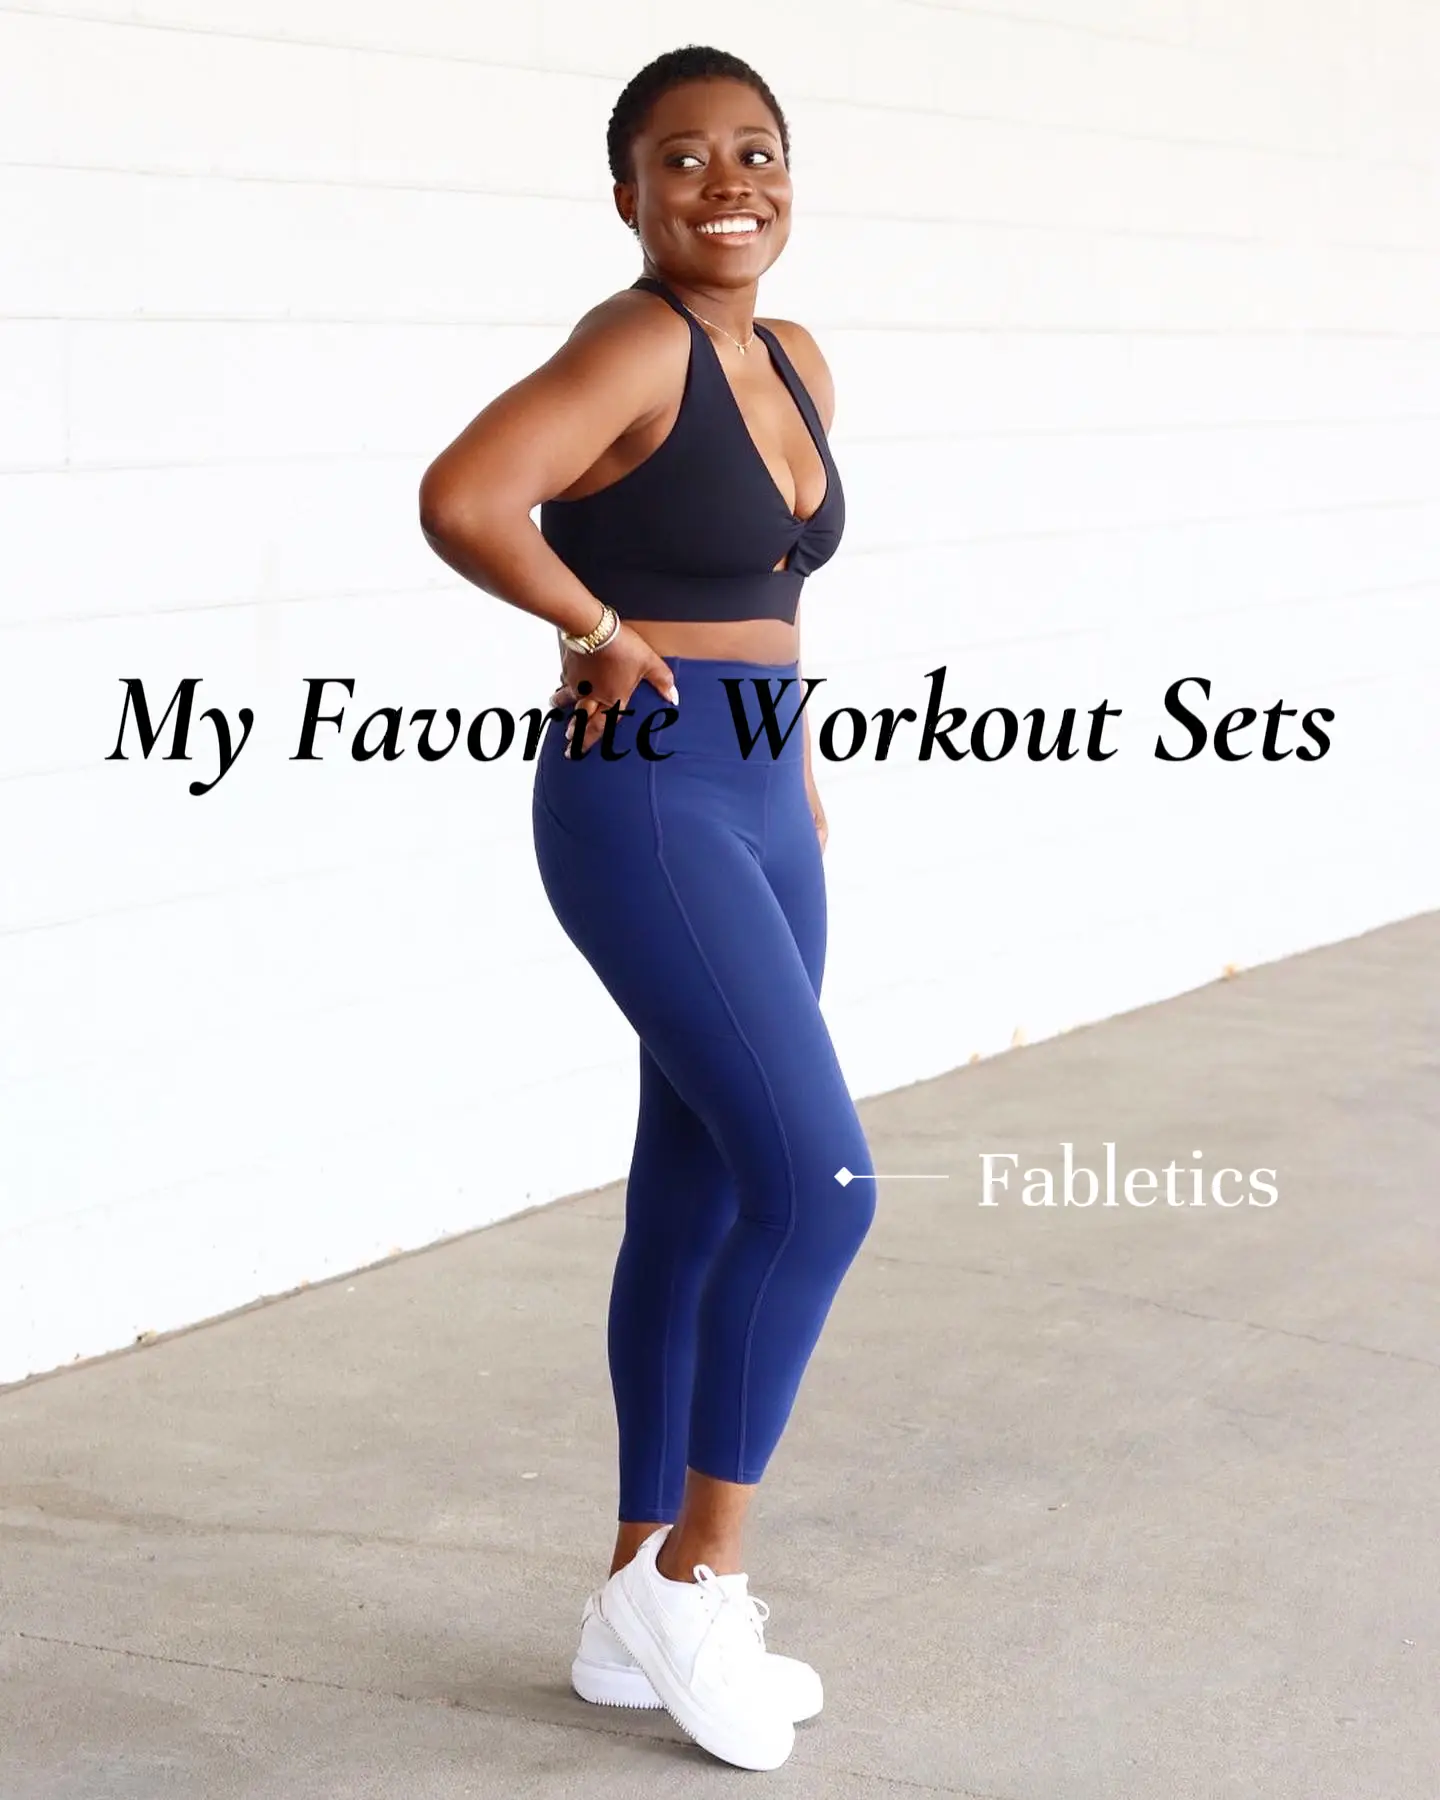 the perfect summer set ✨ @fabletics #moveinfabletics